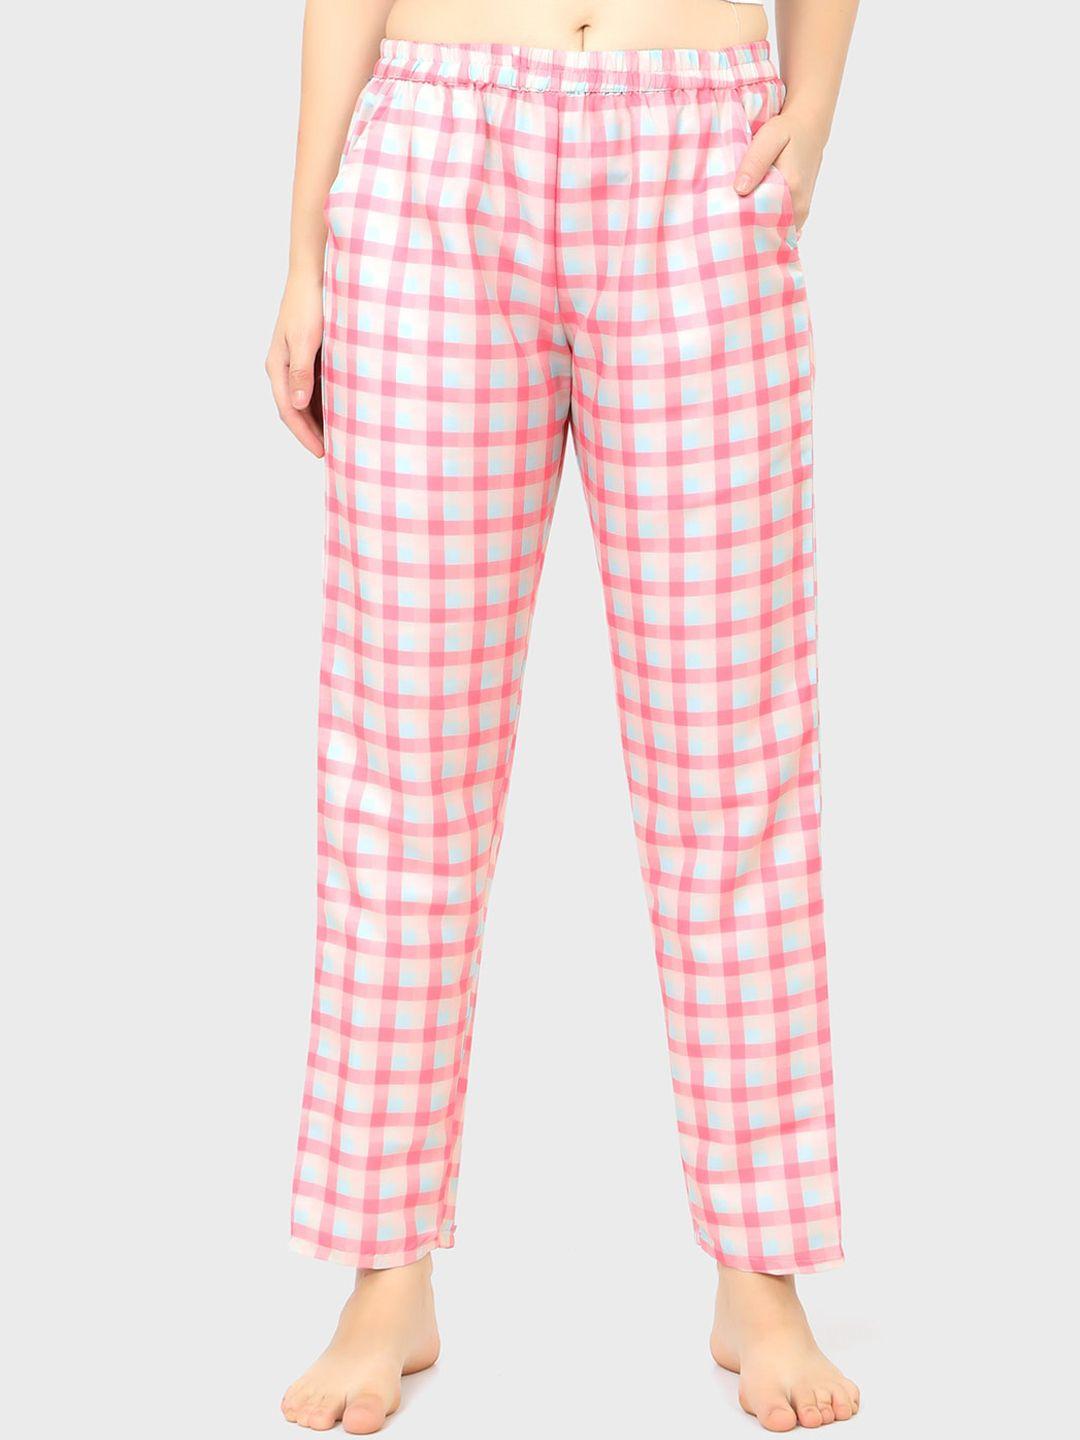 sand dune women pink & white checked cotton lounge pants